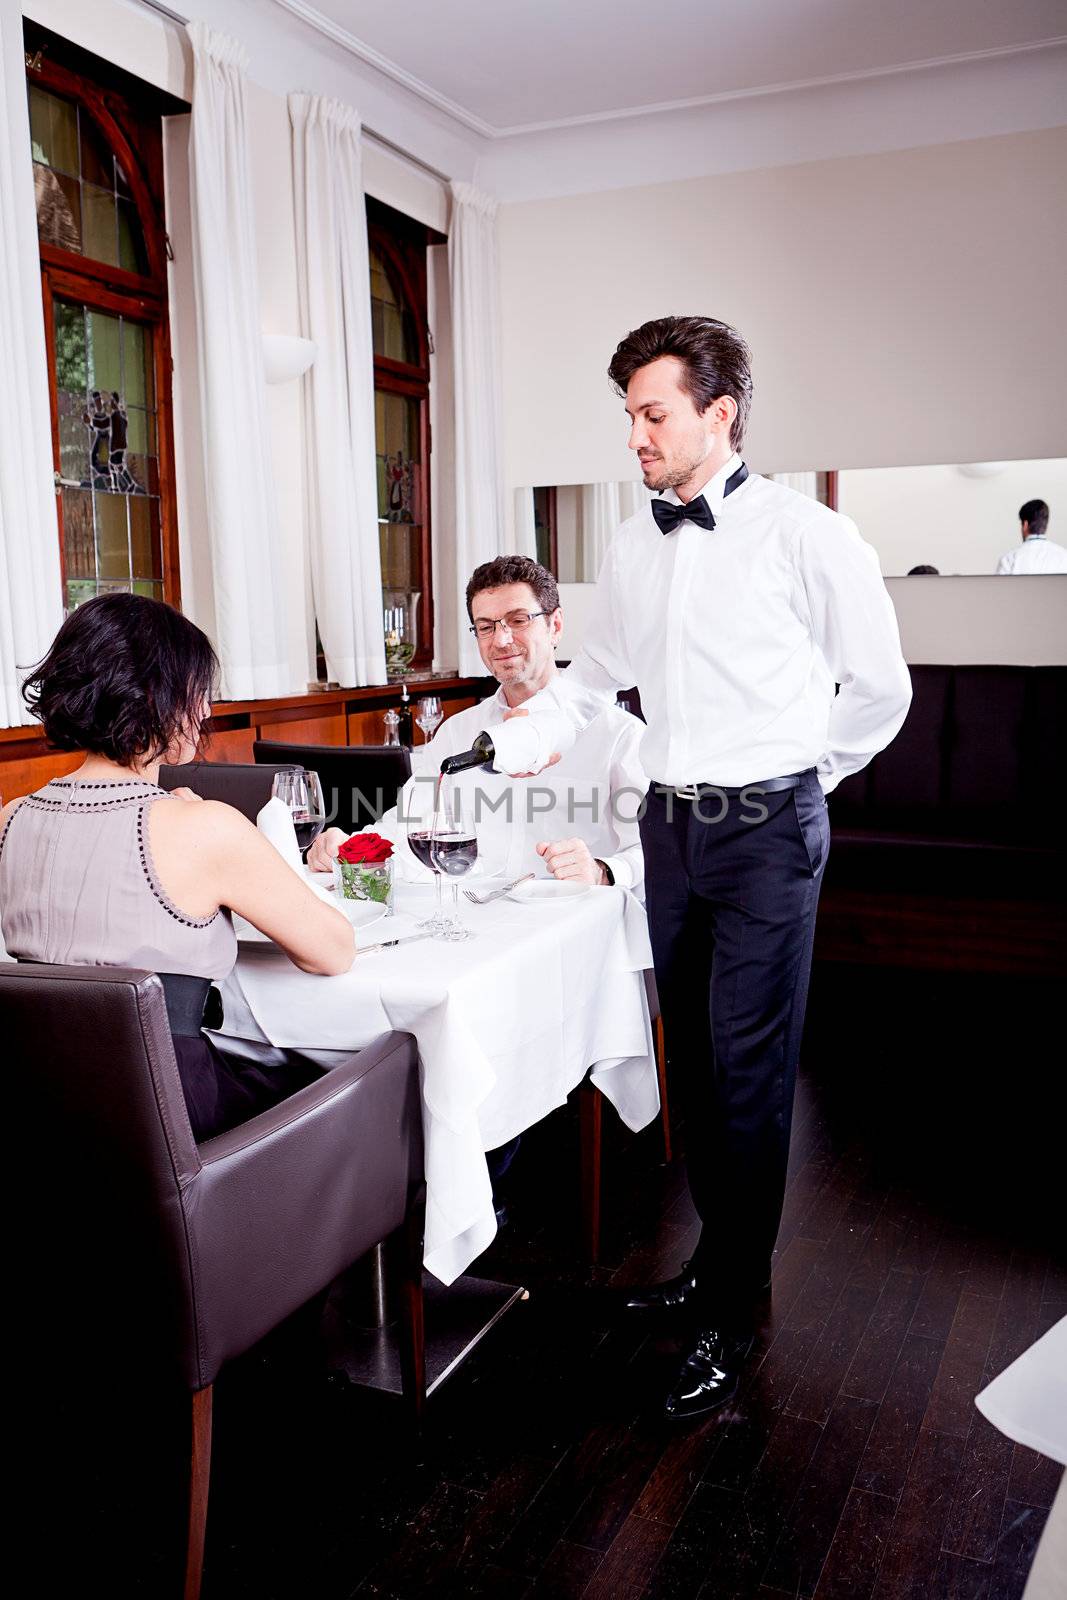 man and woman in restaurant for dinner drinking red wine and smiling